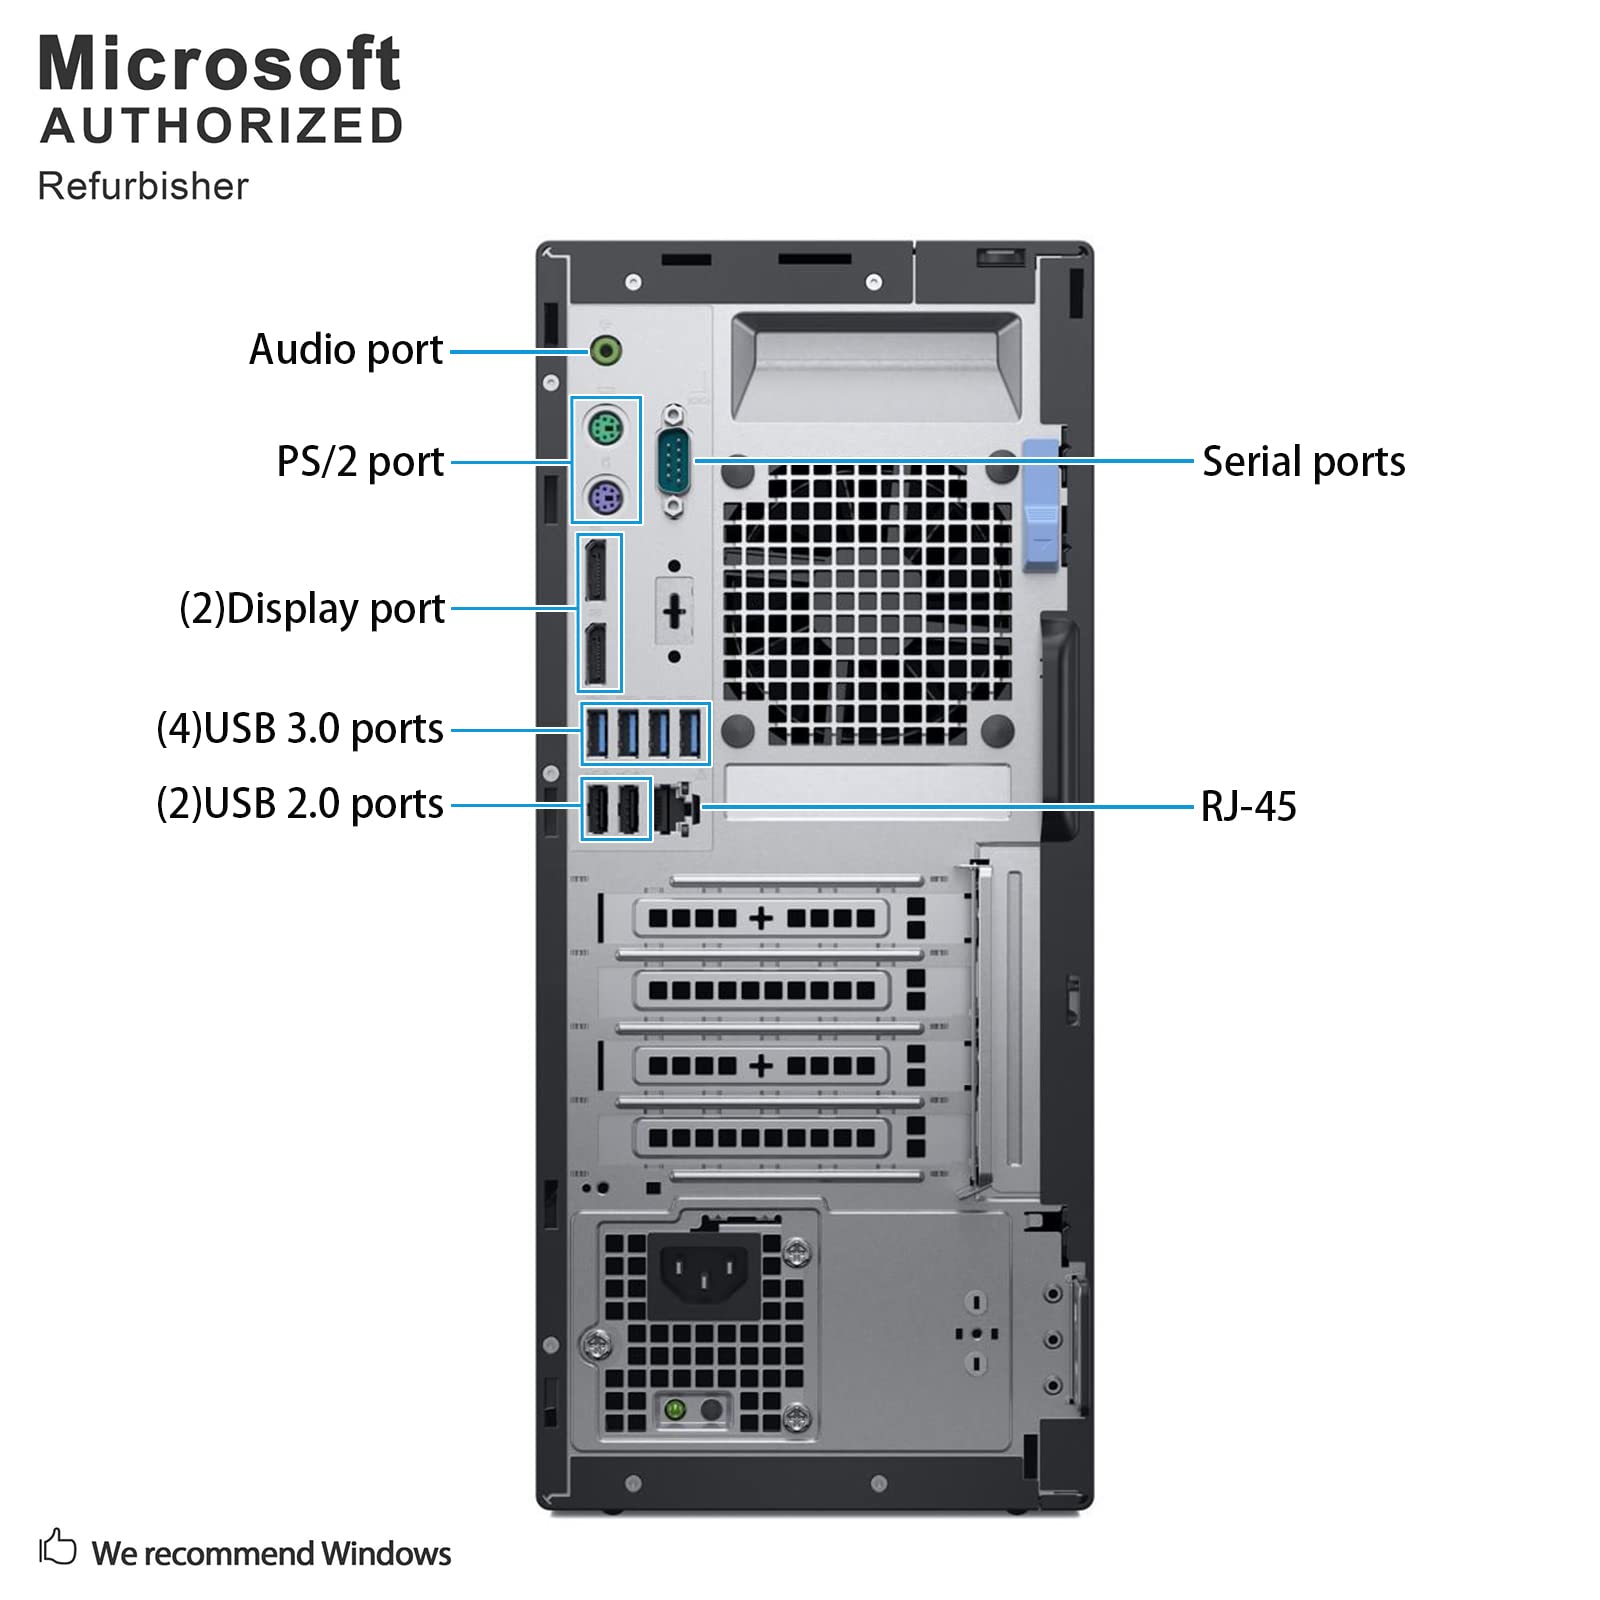 Dell OptiPlex 7060 Tower High Performance Business Desktop Computer, Intel Six Core i7-8700 up to 4.6GHz, 8G DDR4, 2T, WiFi, BT, 4K Support, DP, Windows 10 Pro 64 English/Spanish/French(Renewed)